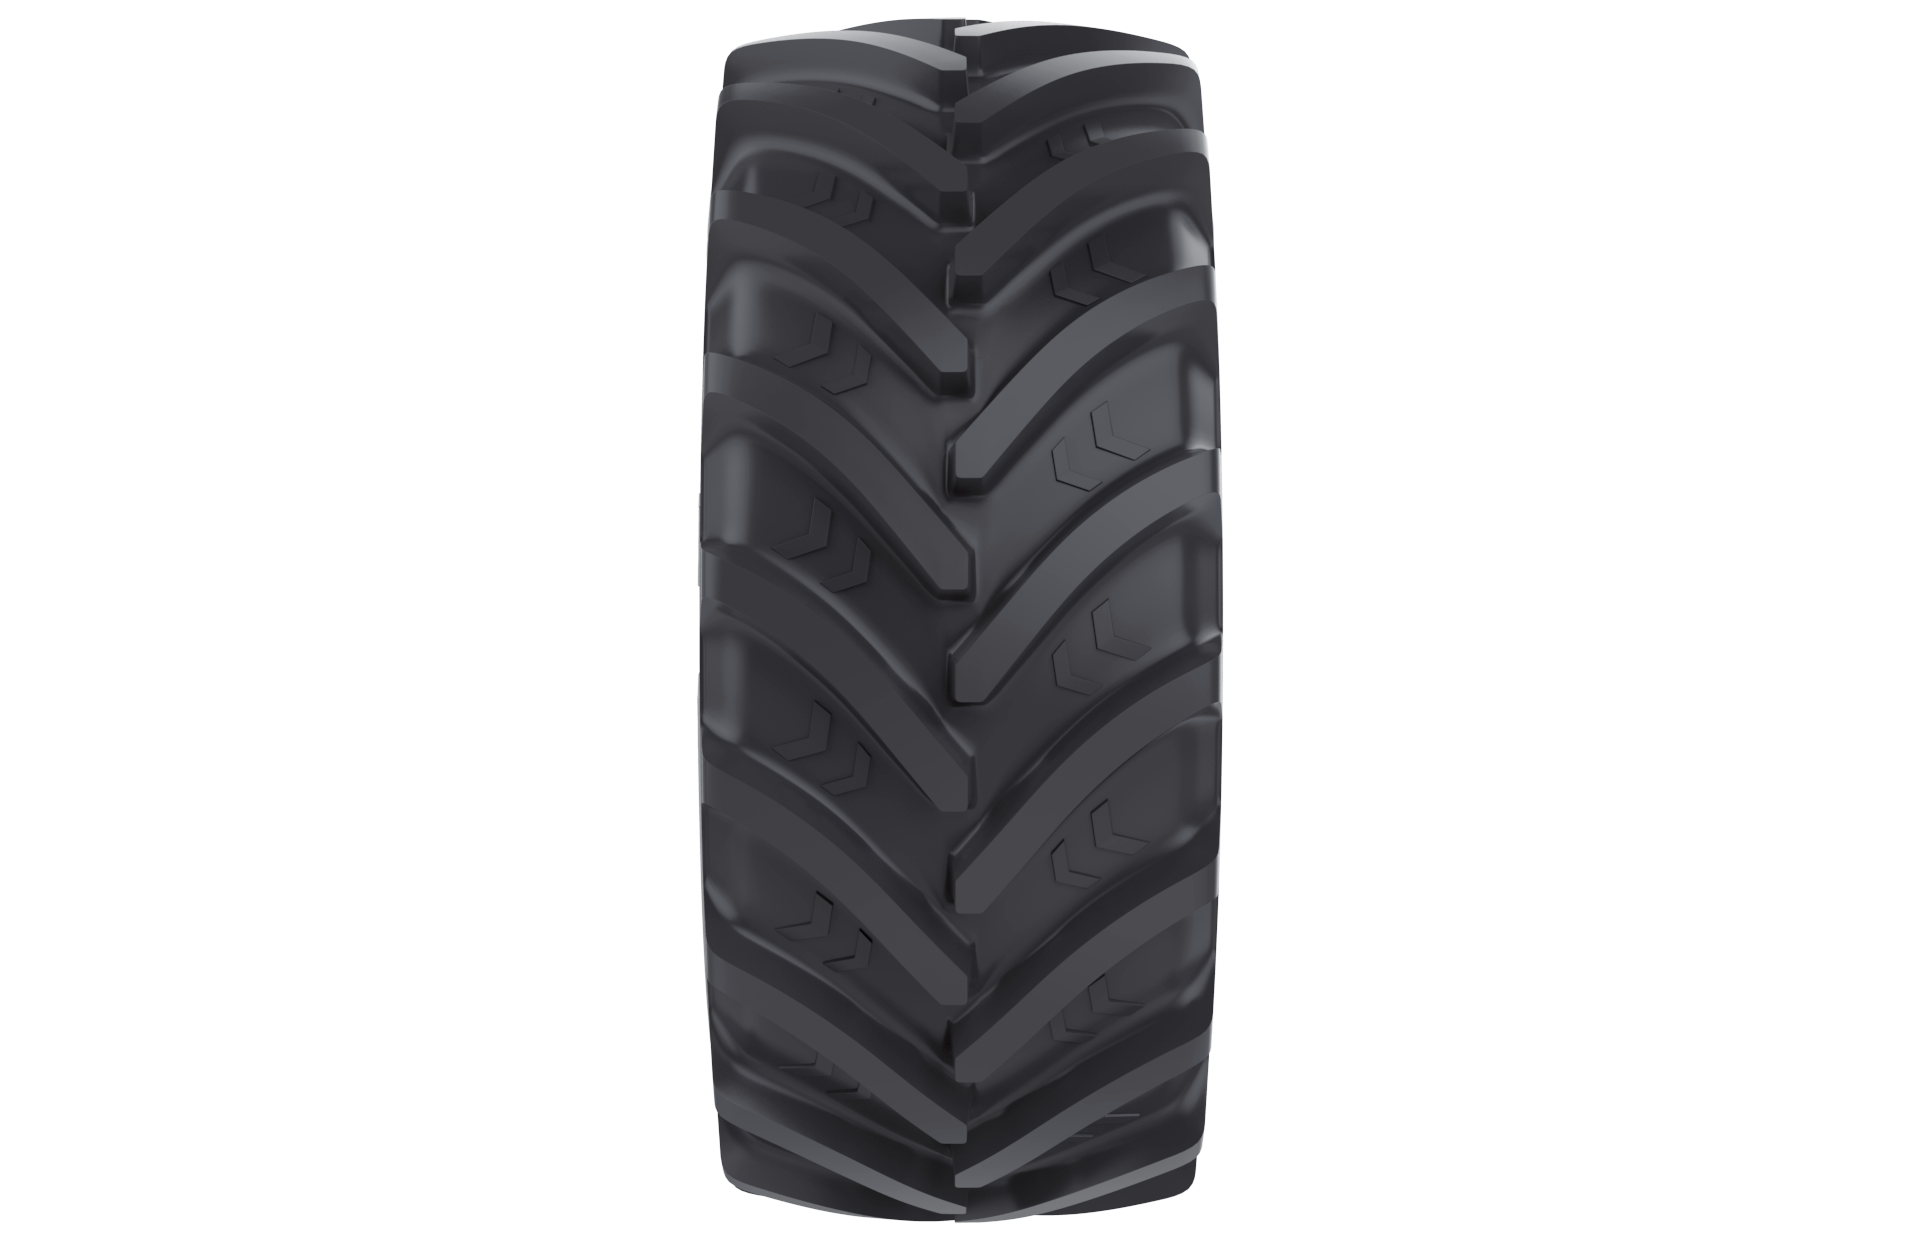 ASCENSO VF 600/70R30 NRO 170D R1-W TL VDR2000 STEEL BELTED